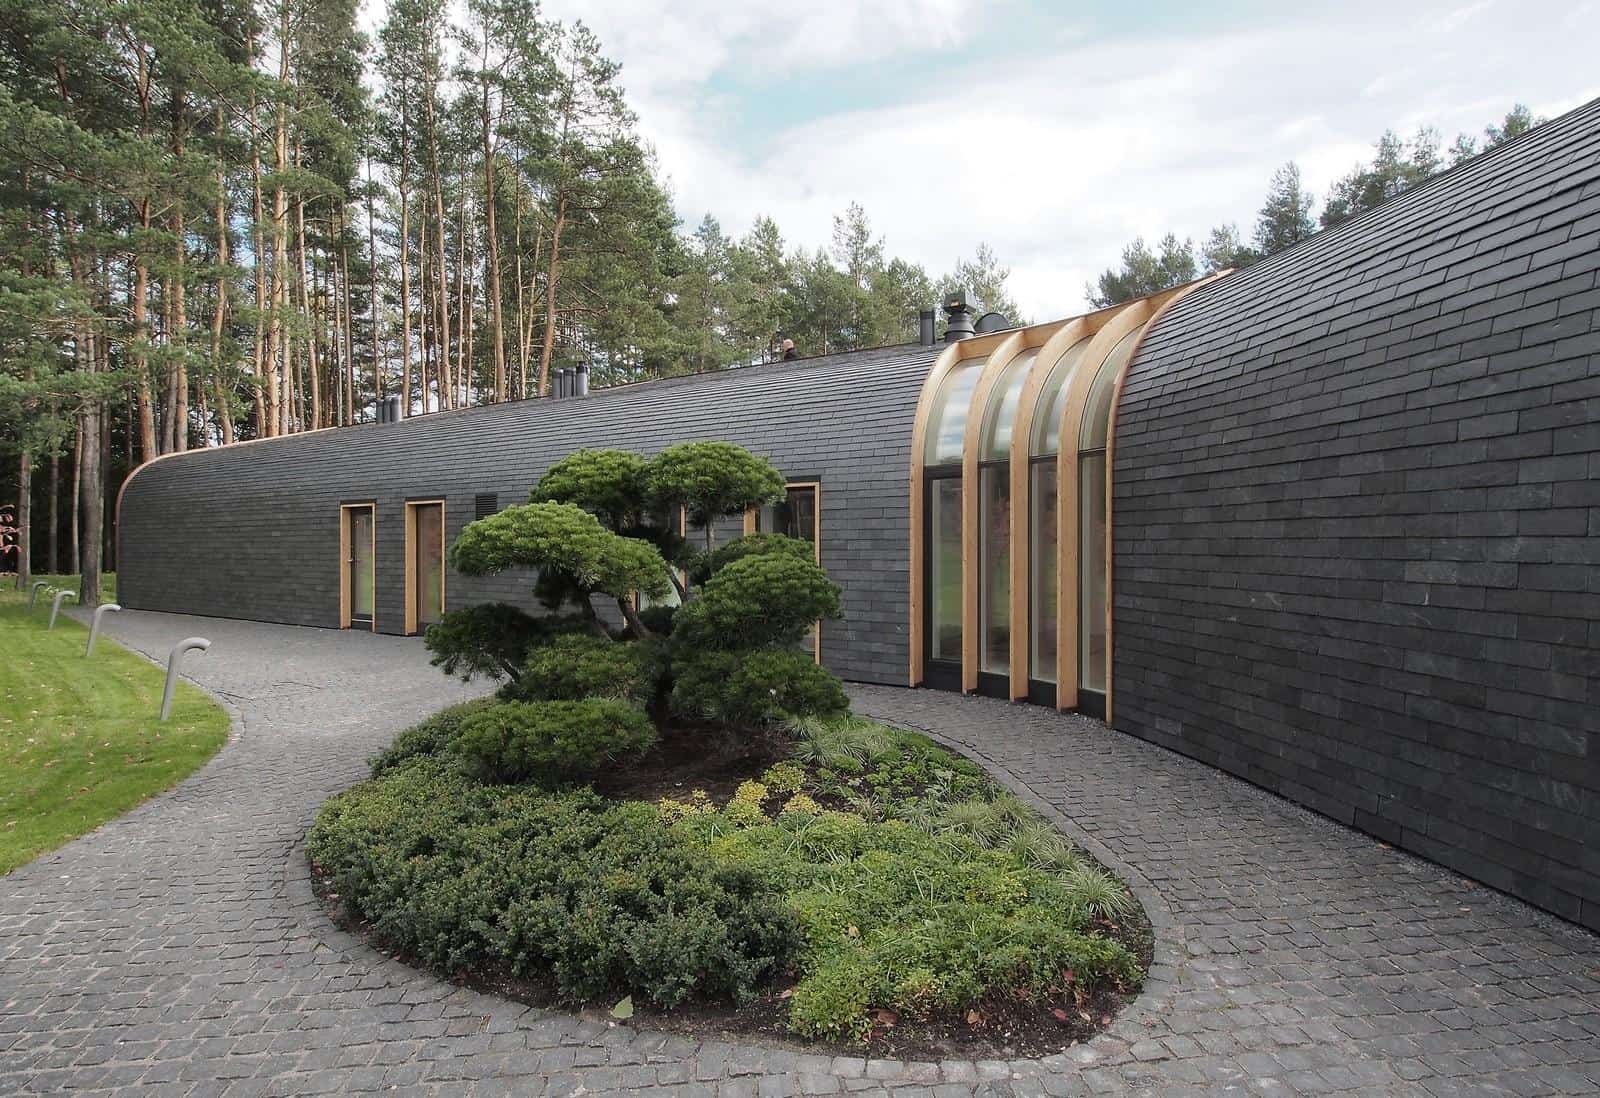 Very Unusual and Very Cool Triangular House in Lithuania